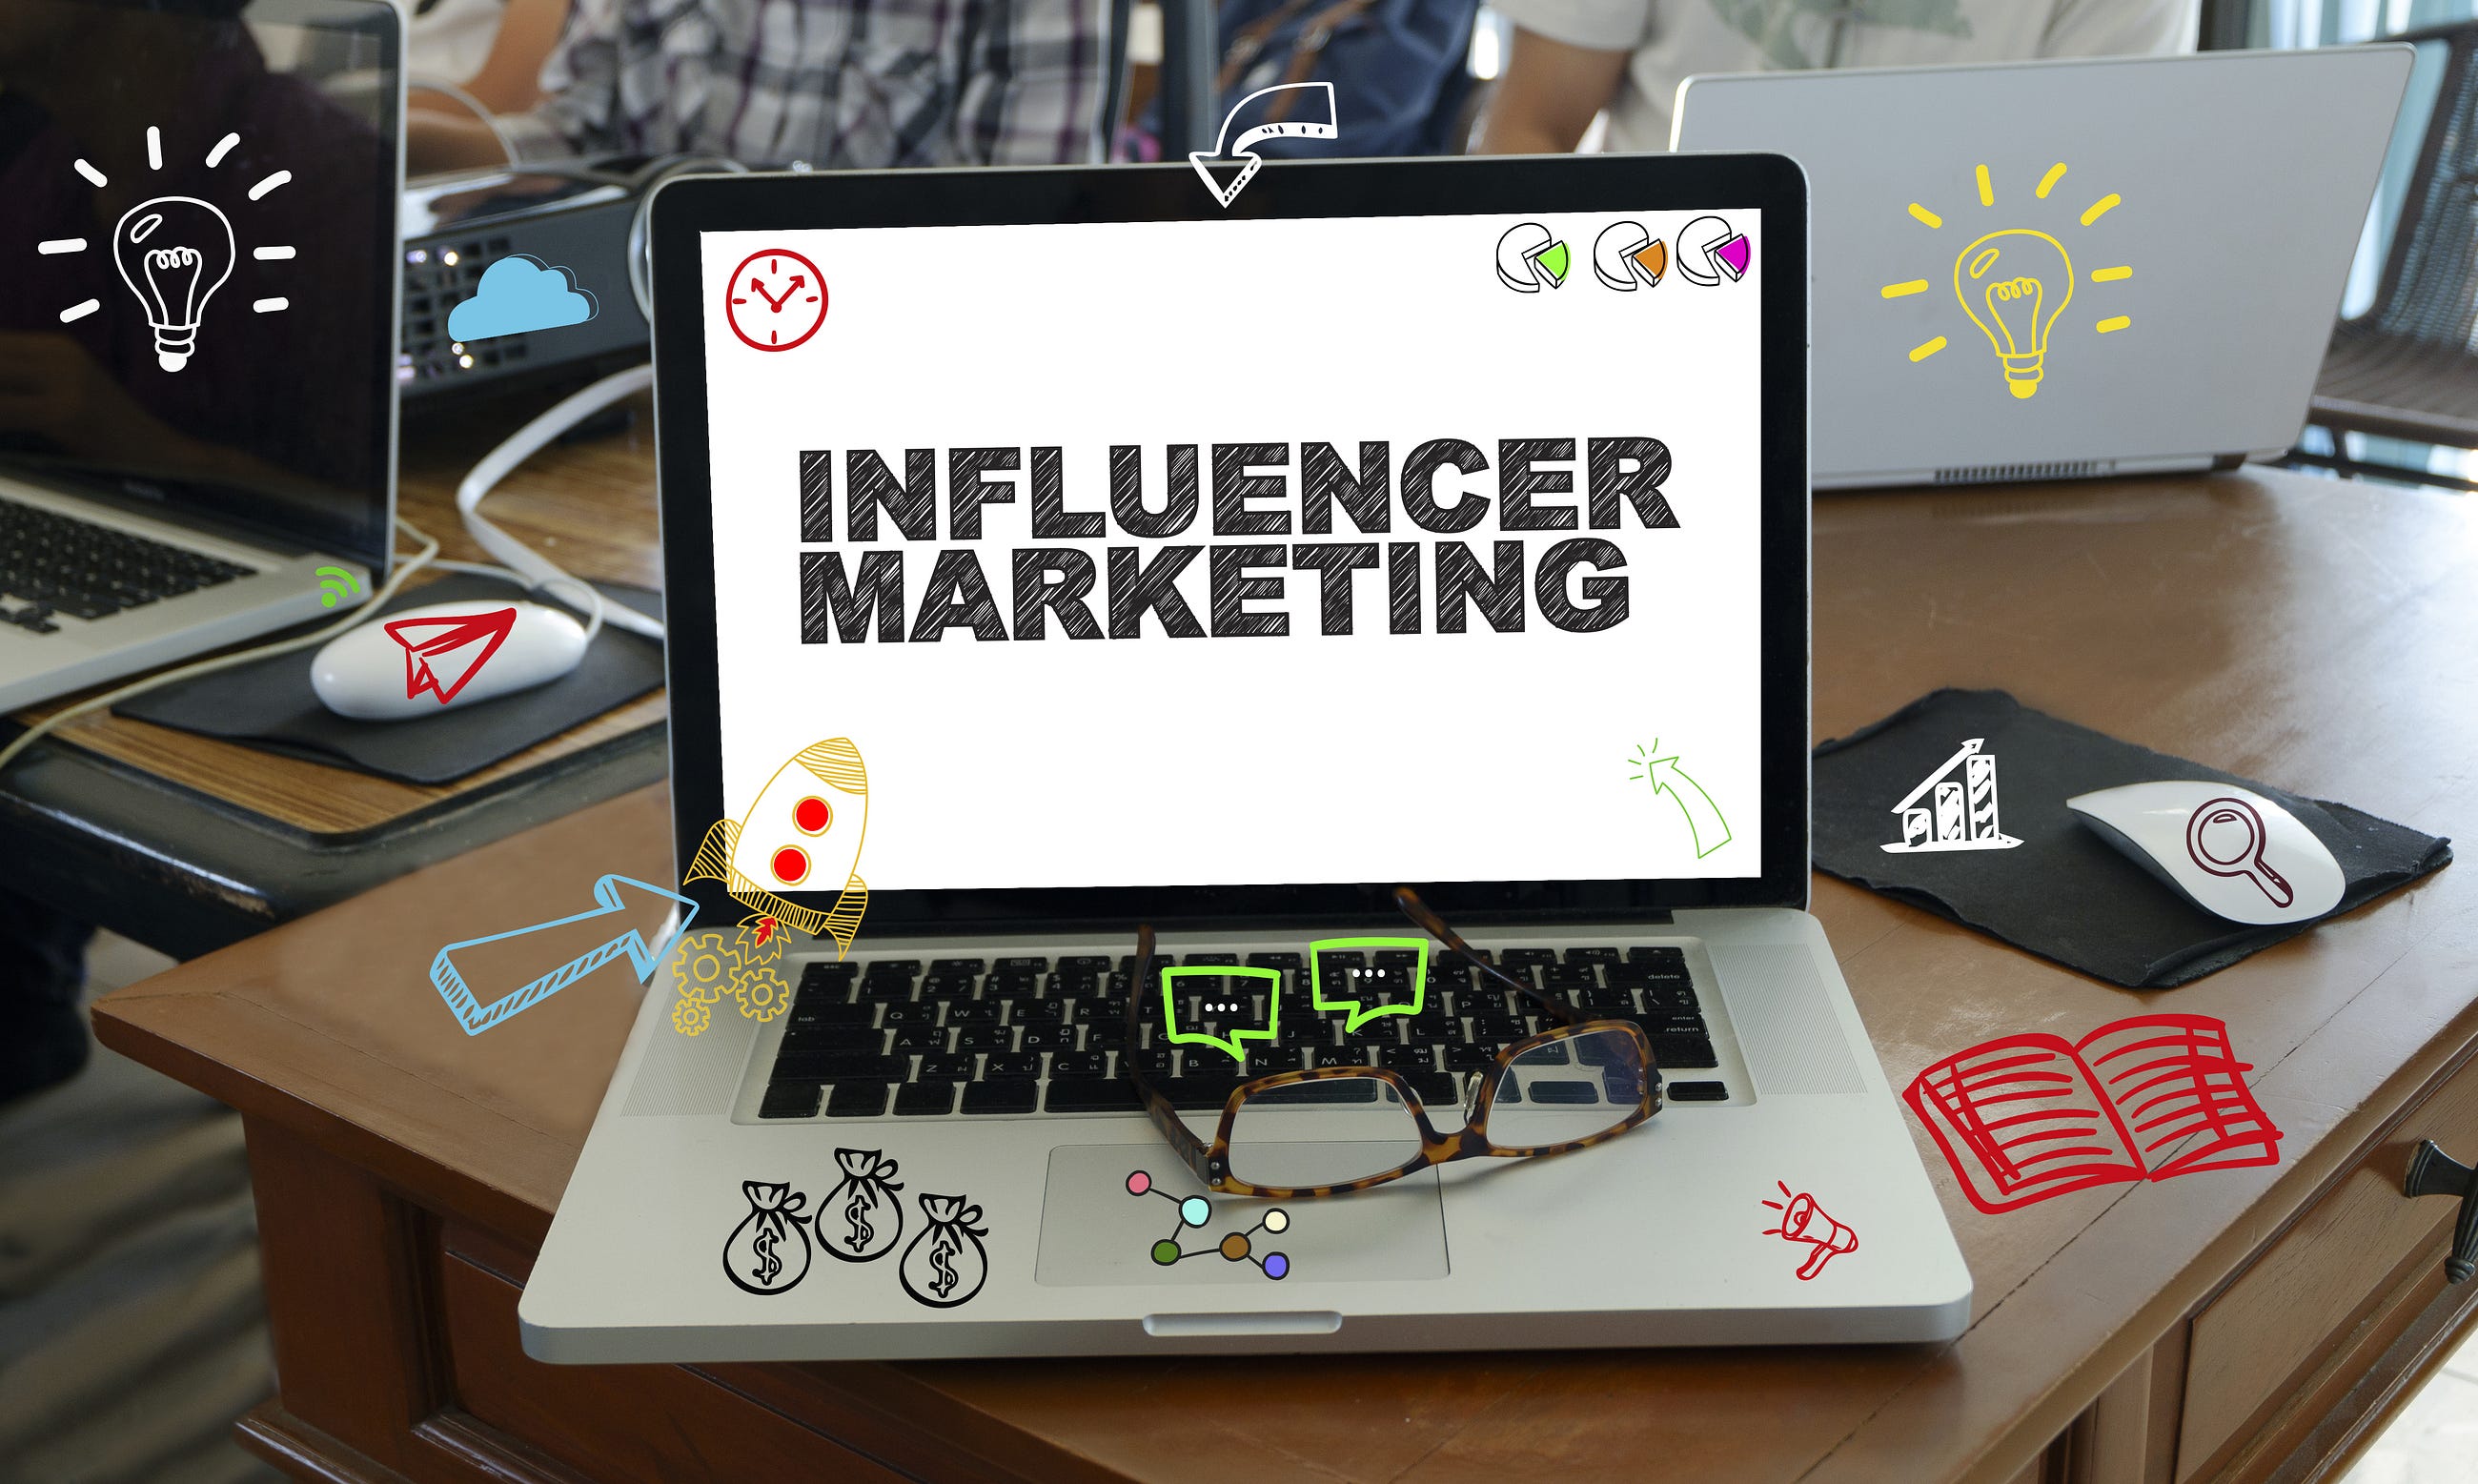 Is Influencer Marketing an Optimal Strategy for B2B Companies?